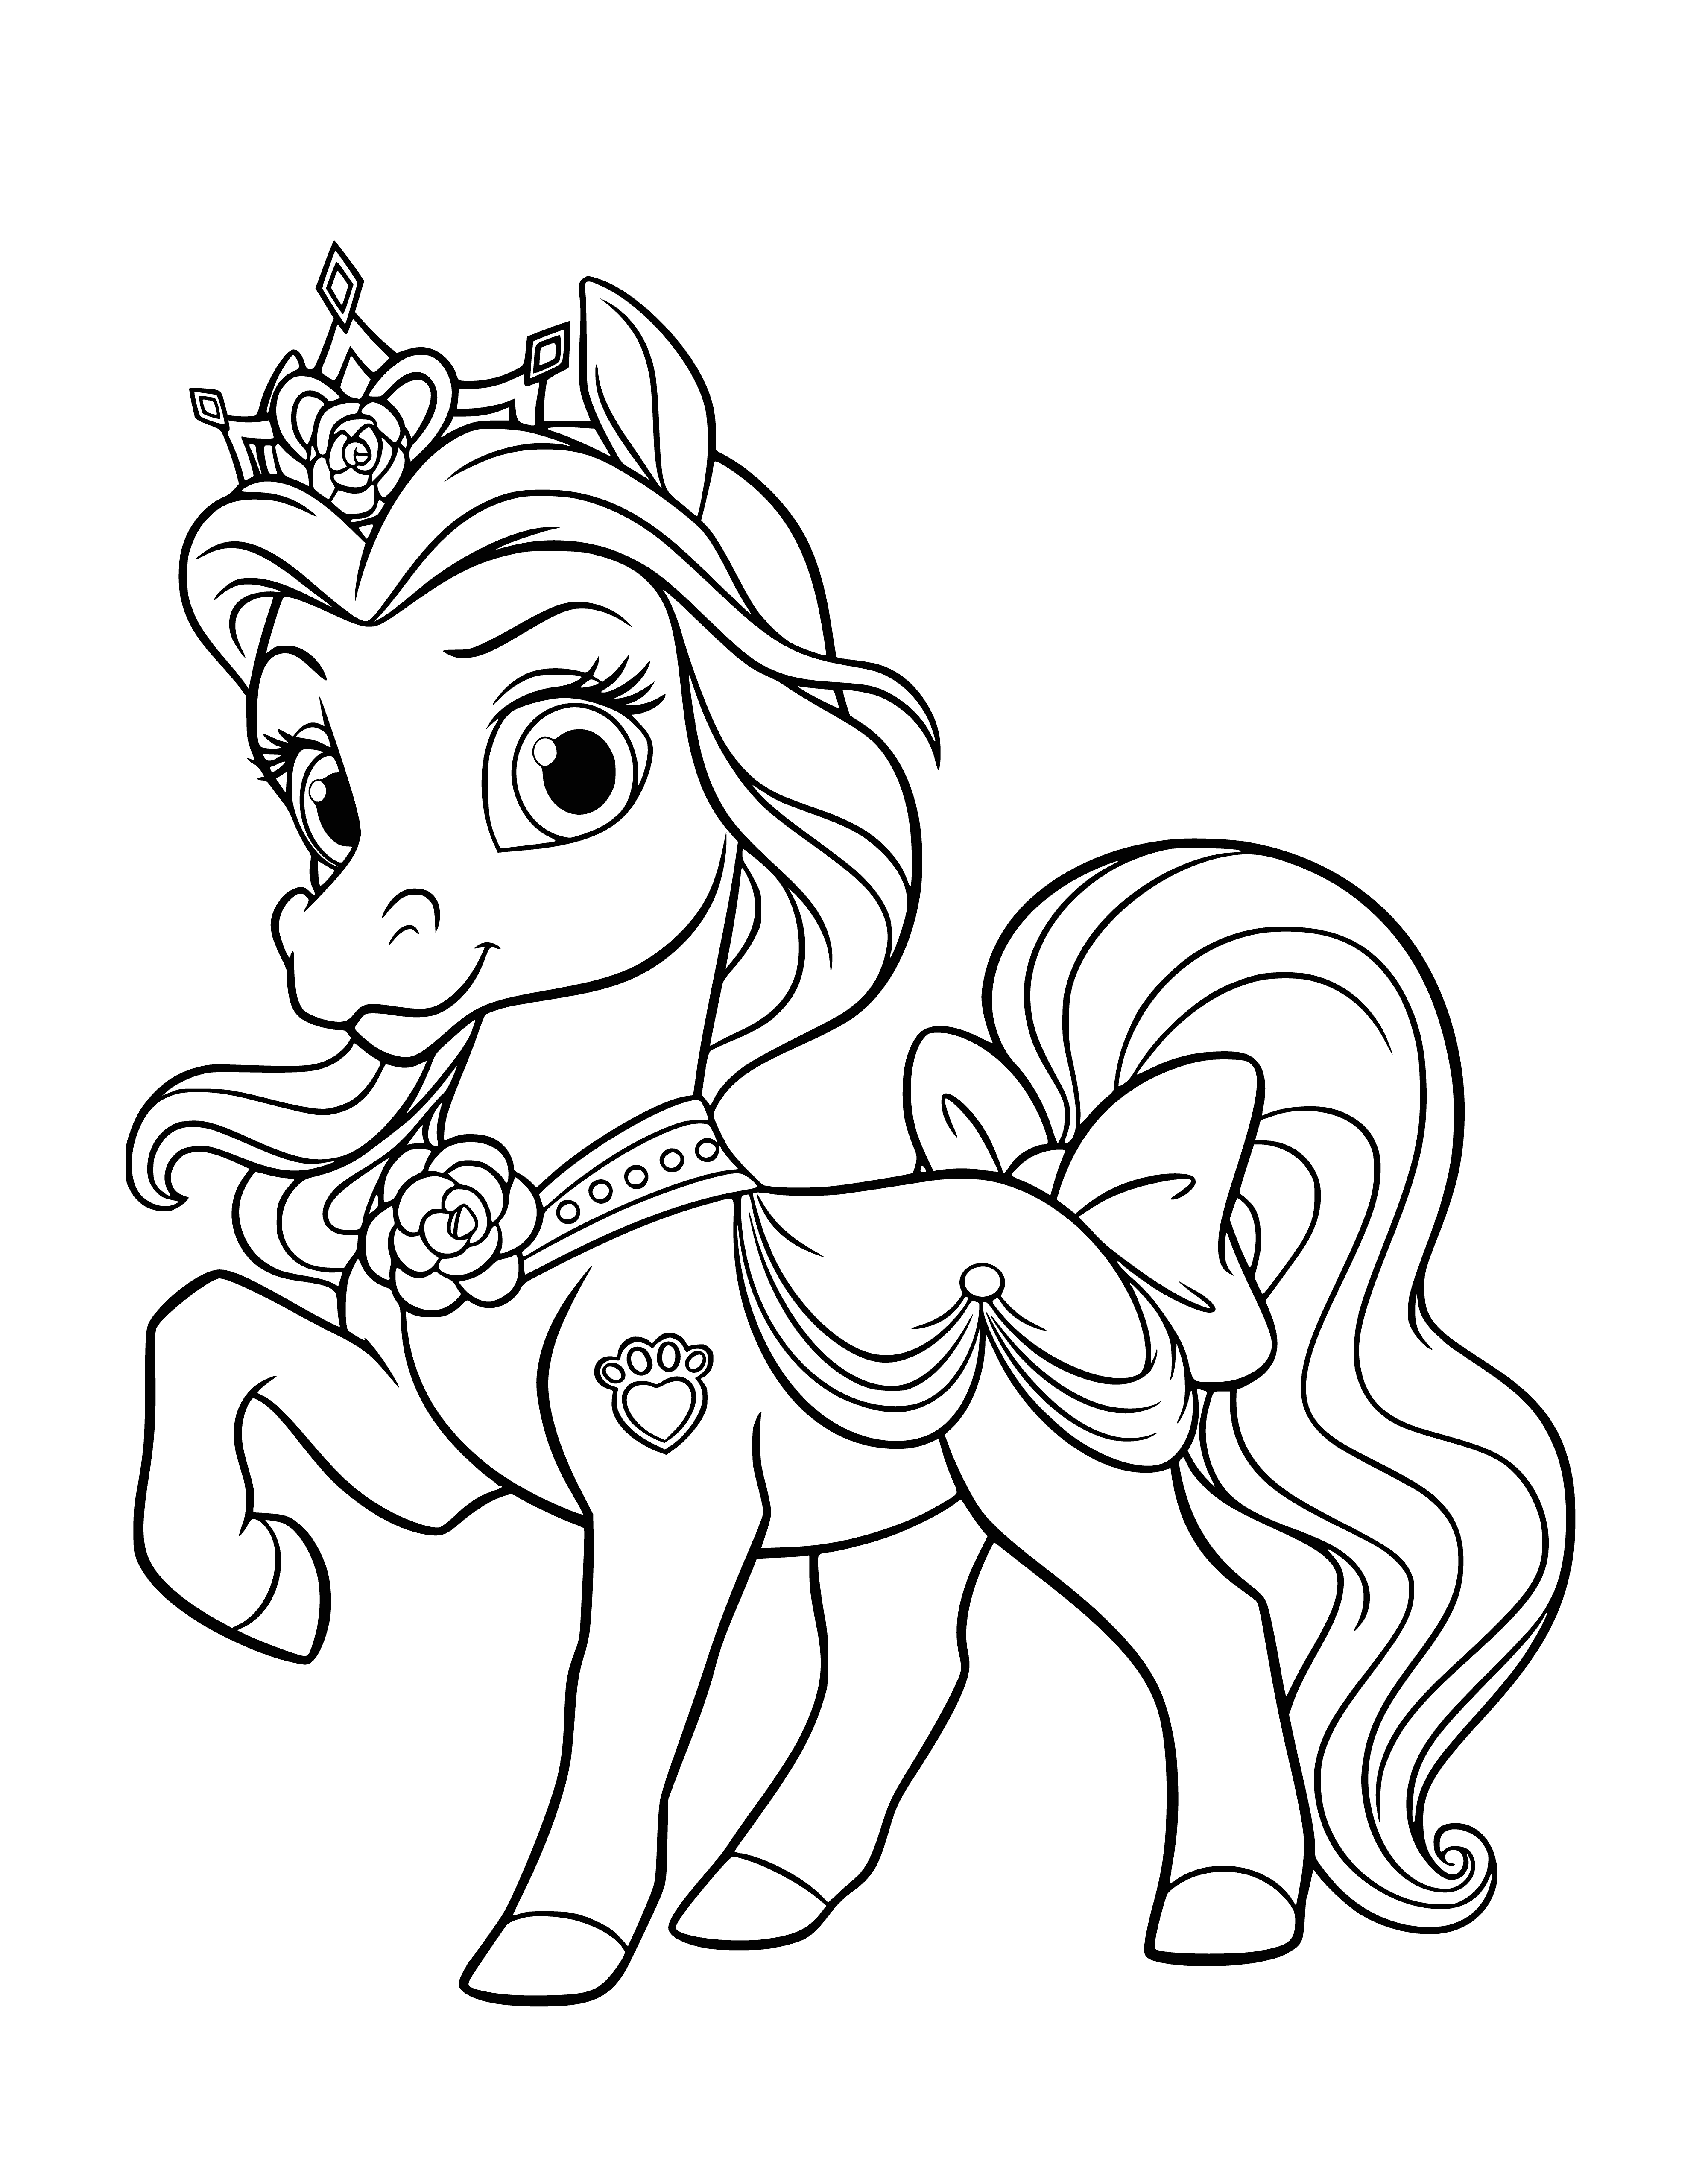 coloring page: Brown & white pony and black & white pet belle standing on a grassy field with trees in the background.